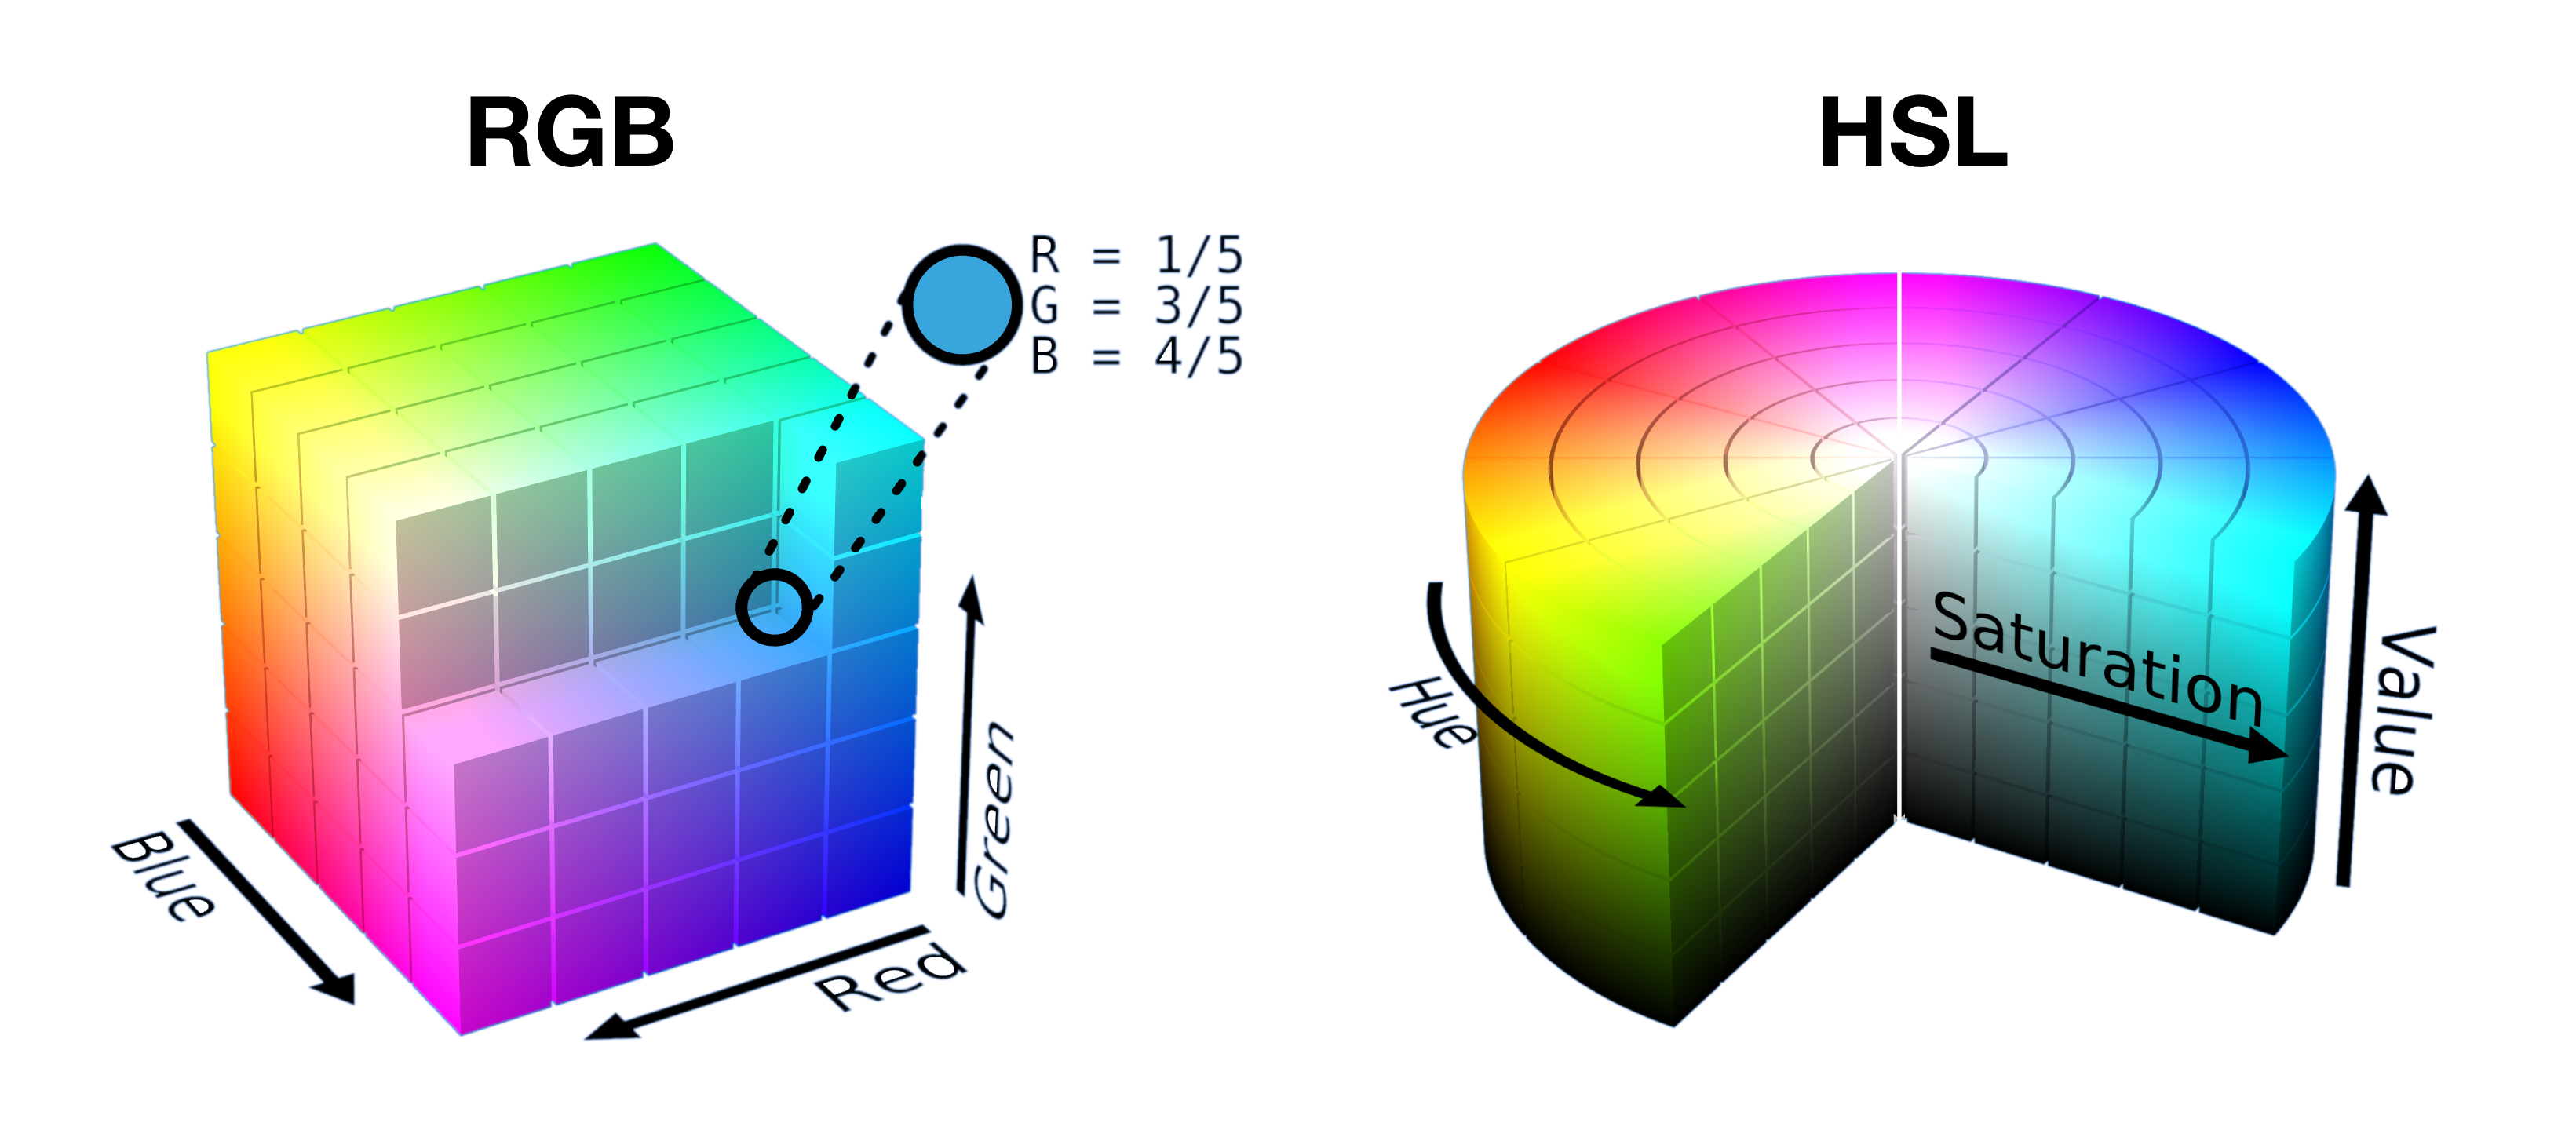 A half cut open RGB cube and slices into HSL cylinder are shown side by side, to show how the colors are packed into a shape in each space.